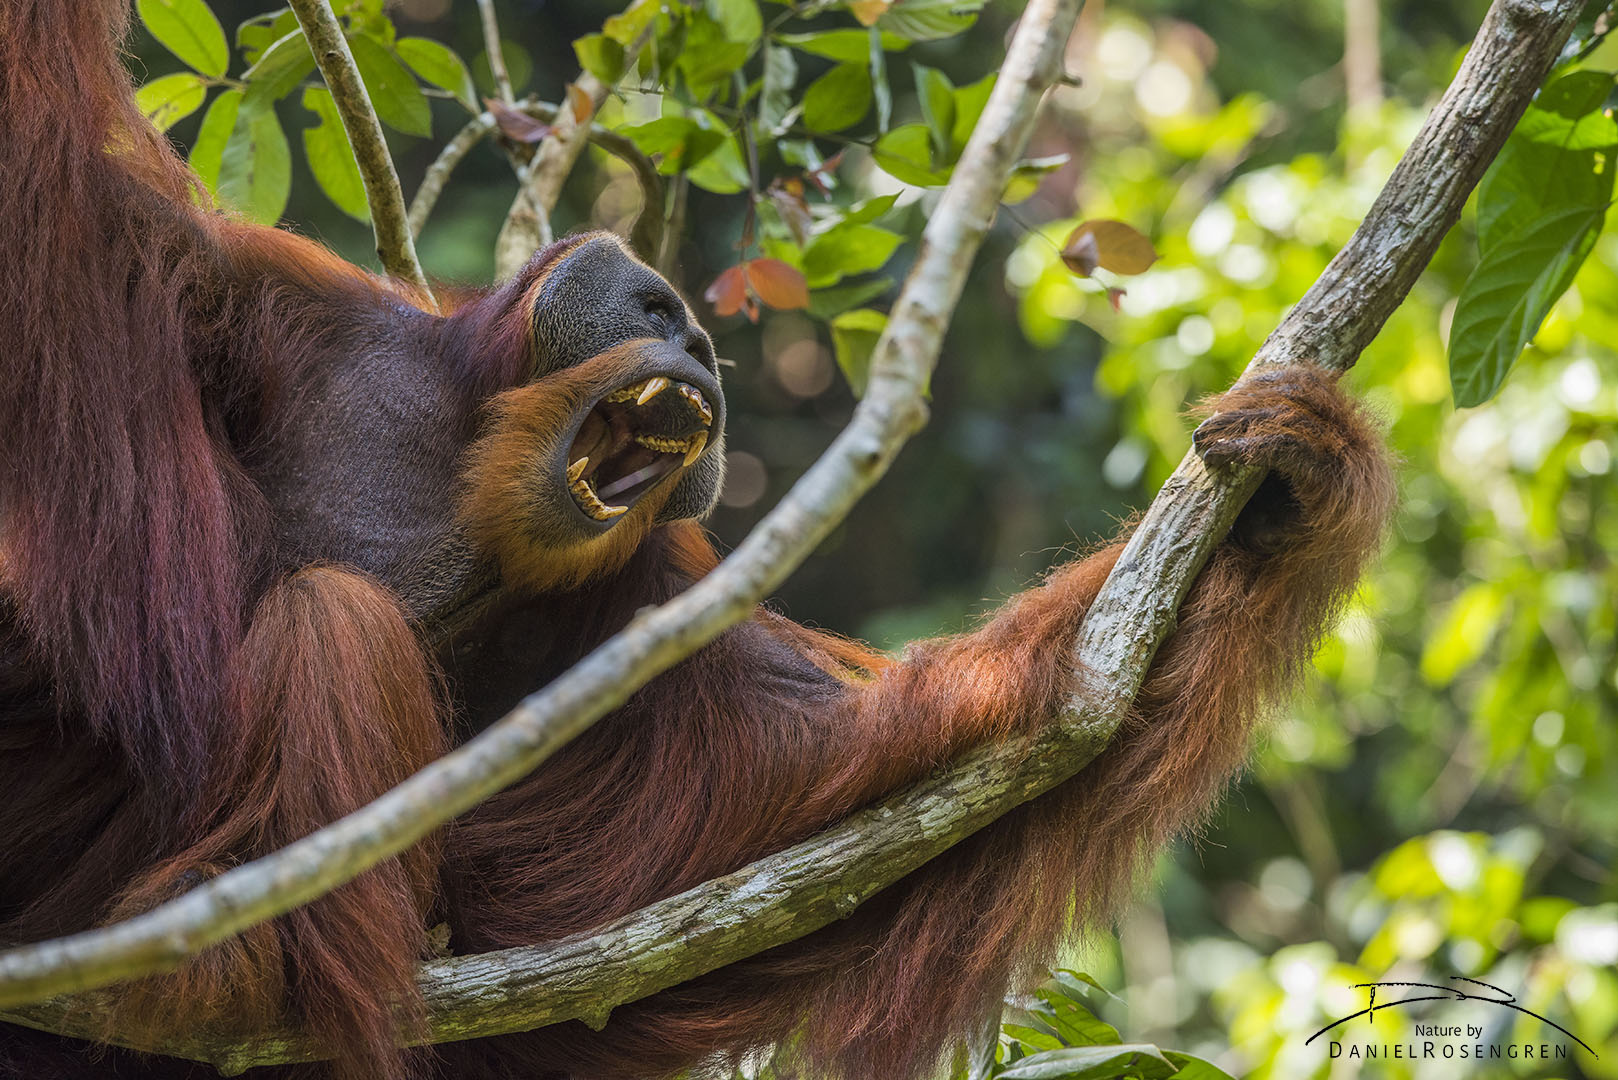 This huge male, Win Gayo, was once a jungle school student and is now one of many successfully re-introduced Orang-utans in Bukit tigapuluh. © Daniel Rosengren